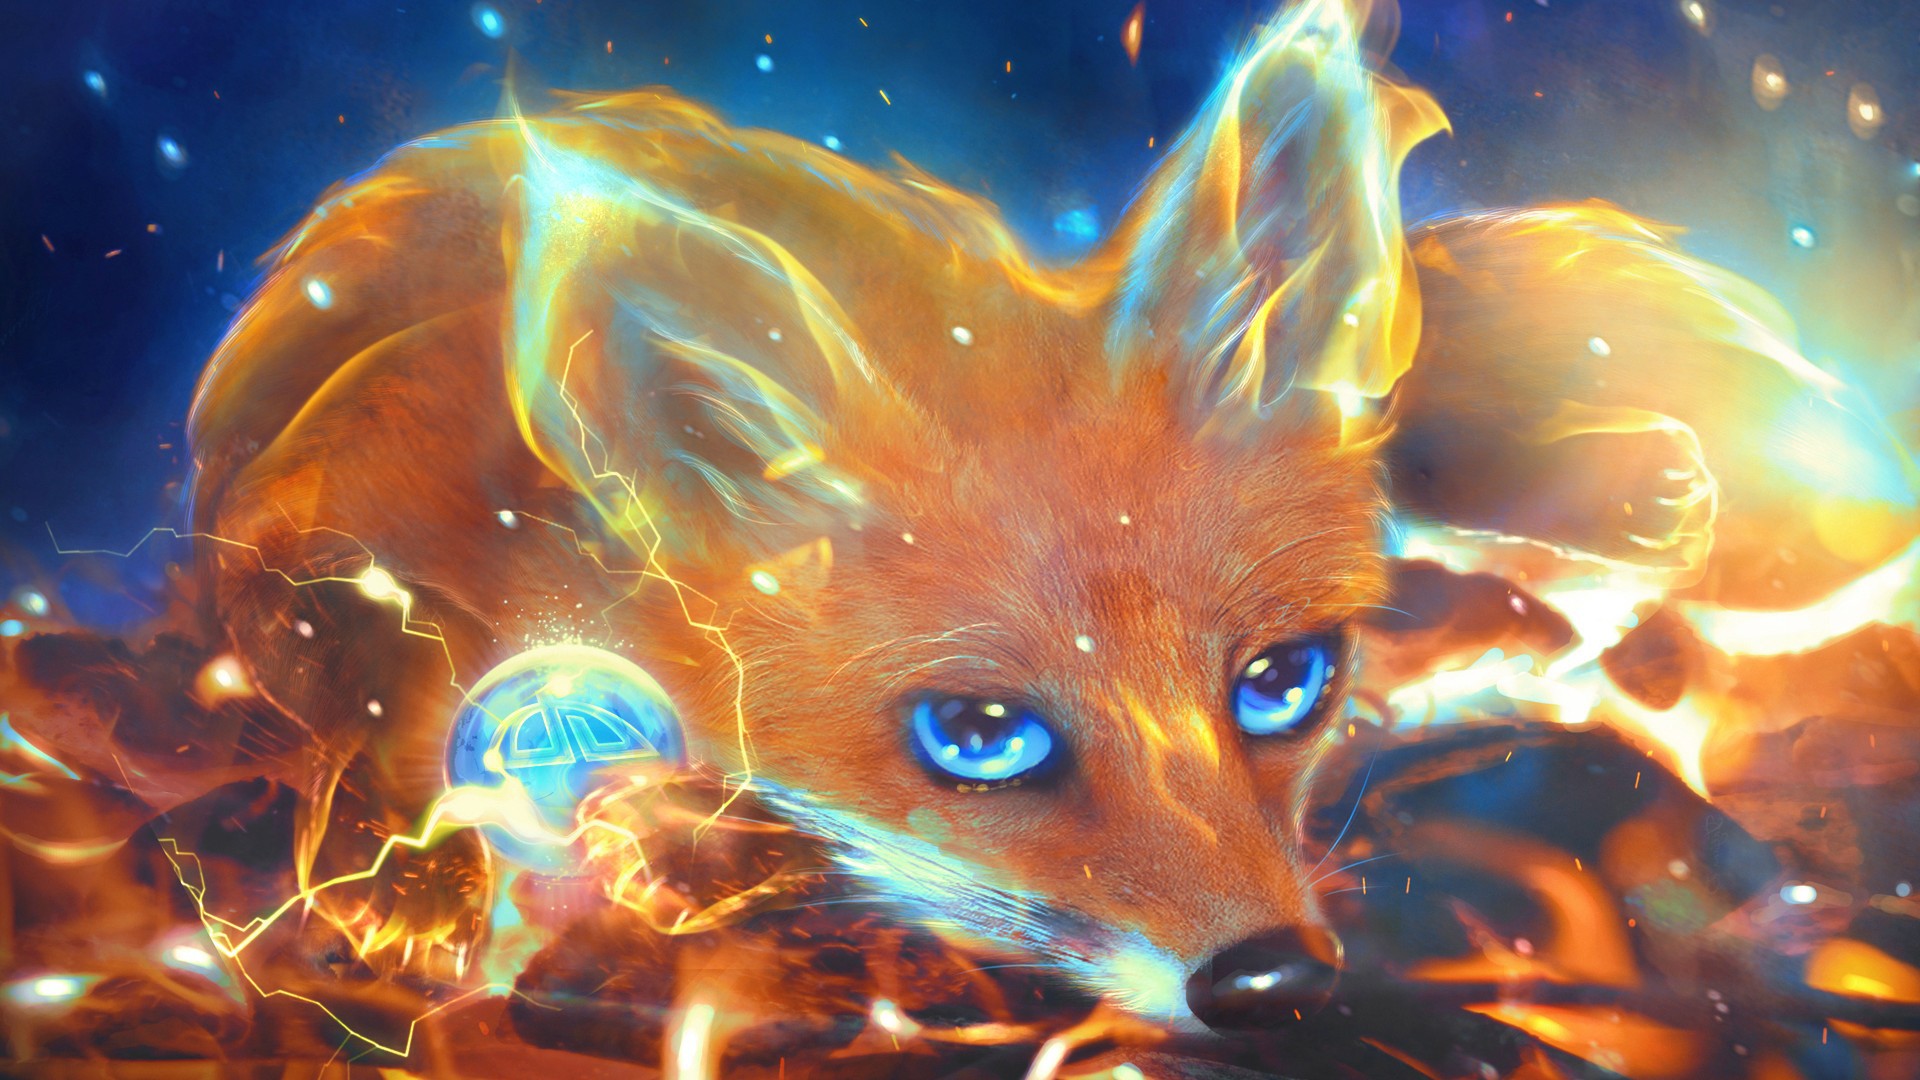 Celestial Fox Wallpaper And Image Pictures Photos